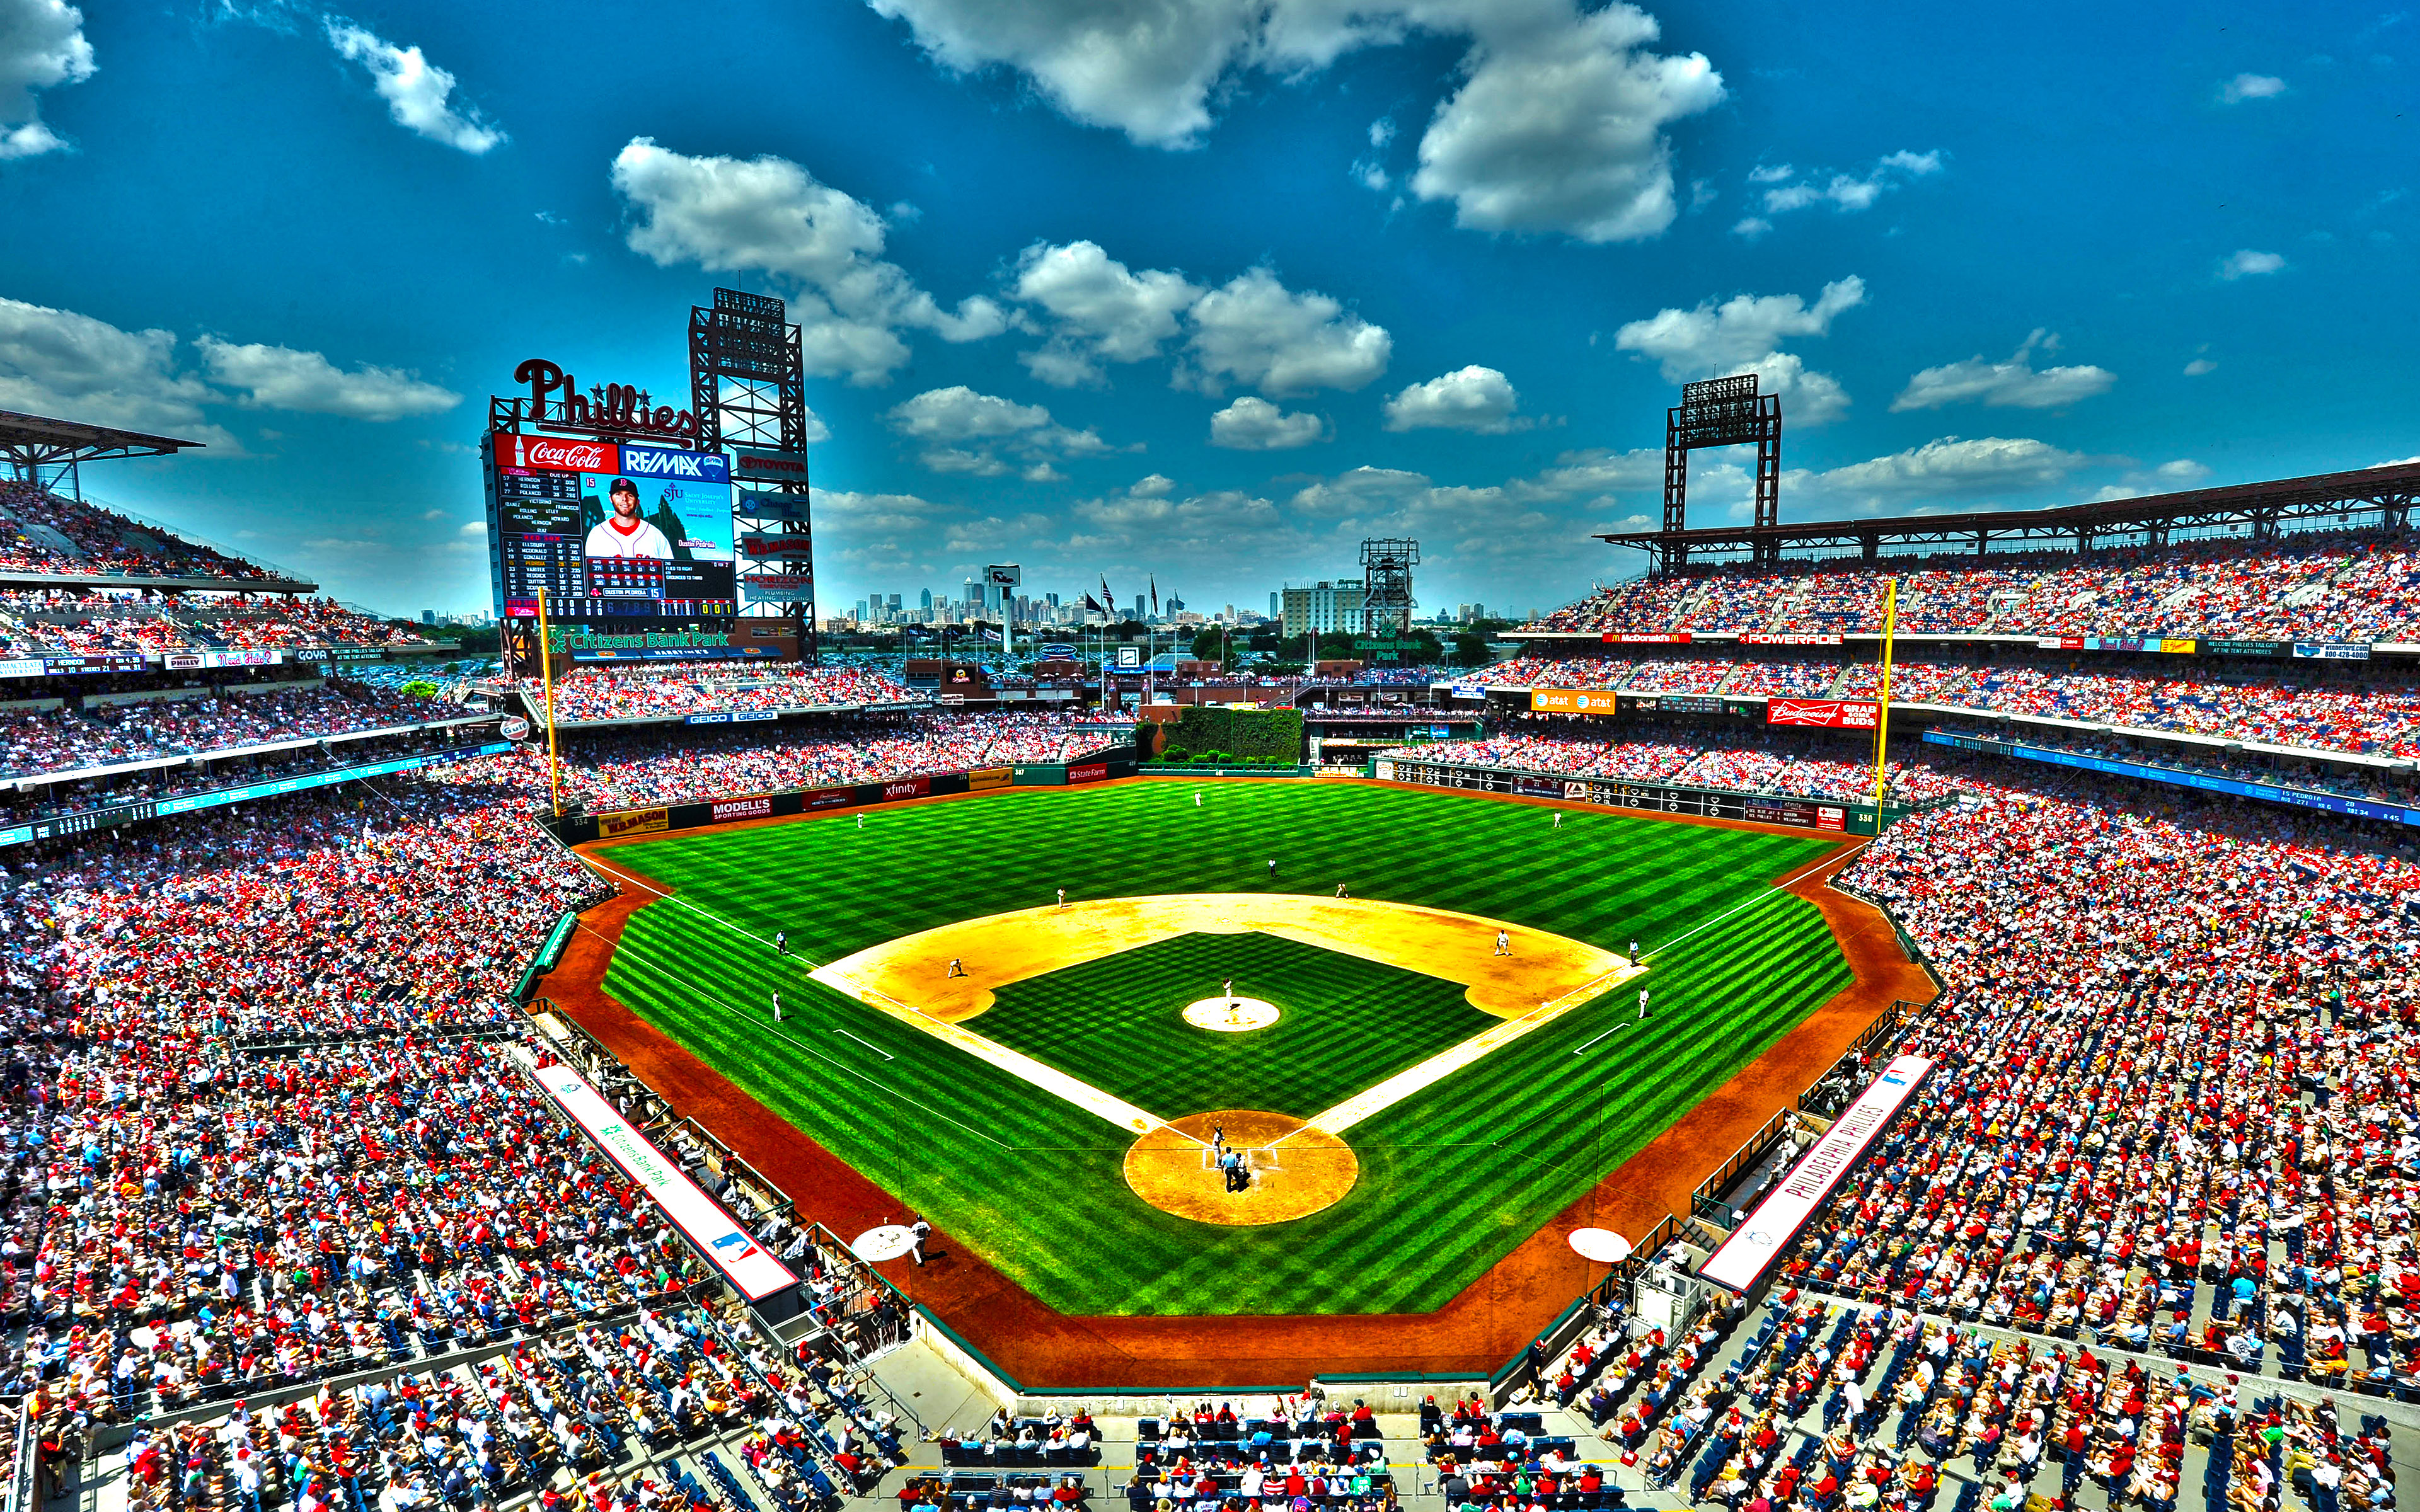 Phillies wallpapers